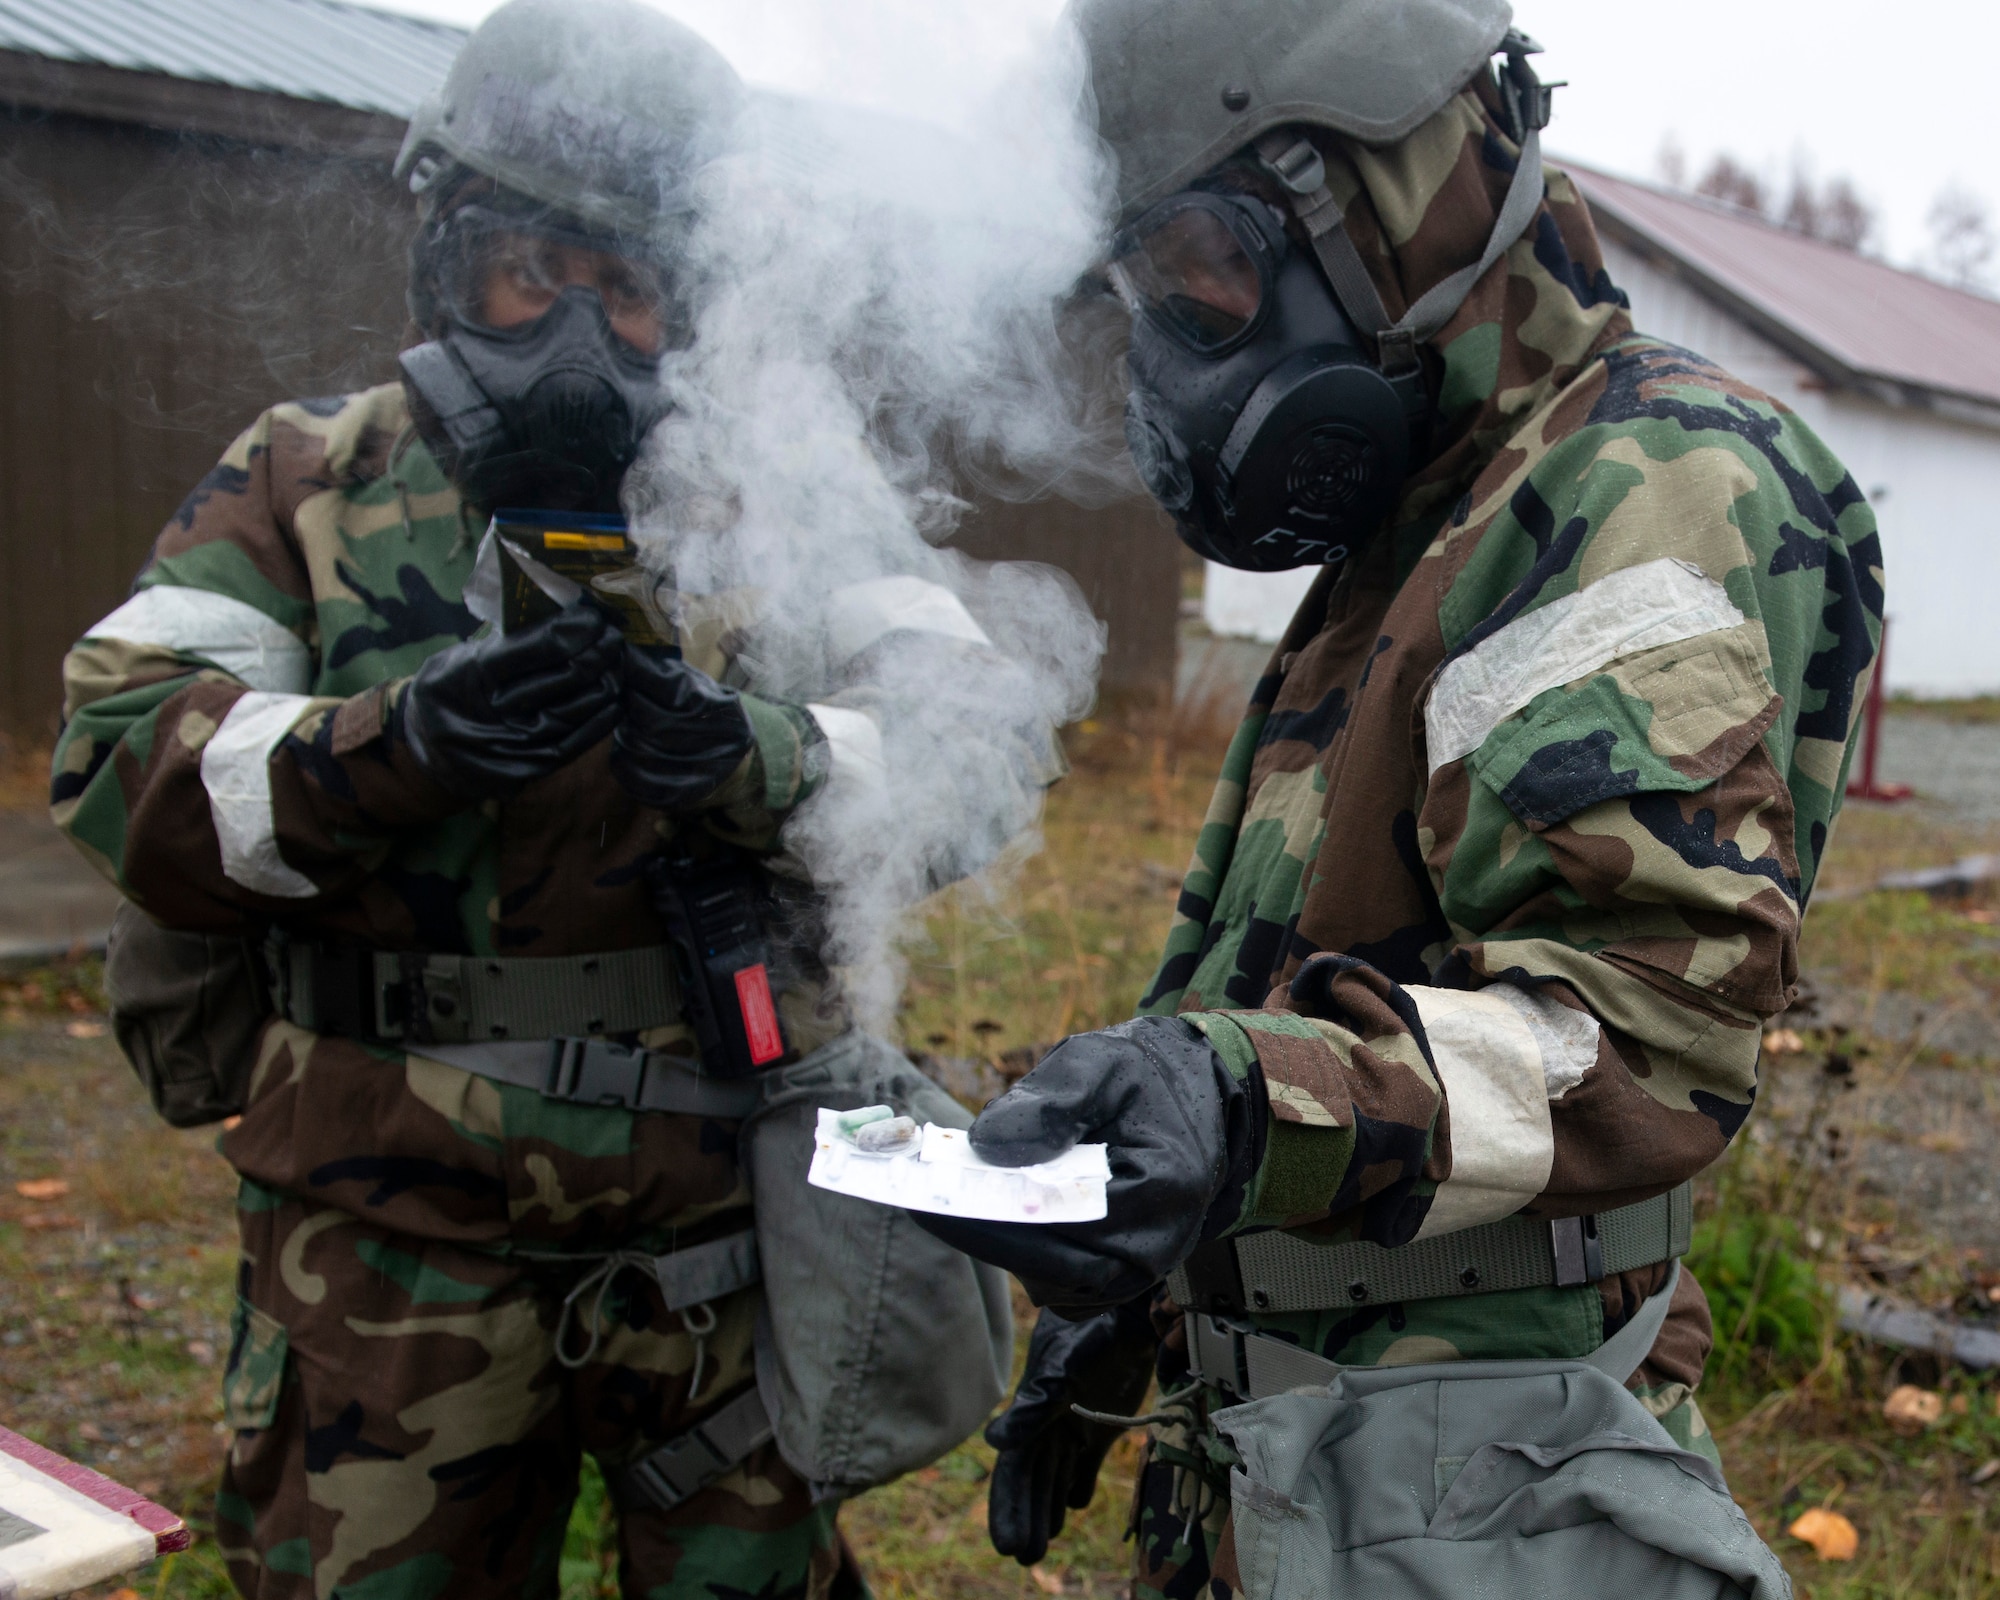 U.S. Airmen assigned to the 673d Air Base Wing use a chemical detection kit in a simulated hazardous environment during Polar Force 20-1 at Joint Base Elmendorf-Richardson, Alaska, Oct. 9, 2019. Designed to test JBER’s mission readiness, Polar Force 20-1 is a two-week exercise that hones Airmen’s skills and experience when facing adverse situations. Airmen refined their contingency tactics, techniques and procedures in support of the Pacific Air Force’s Agile Combat Employment concept of operations. Agile Combat Support excellence yields multi-domain operations success. (U.S. Air Force photo by Airman 1st Class Emily Farnsworth)